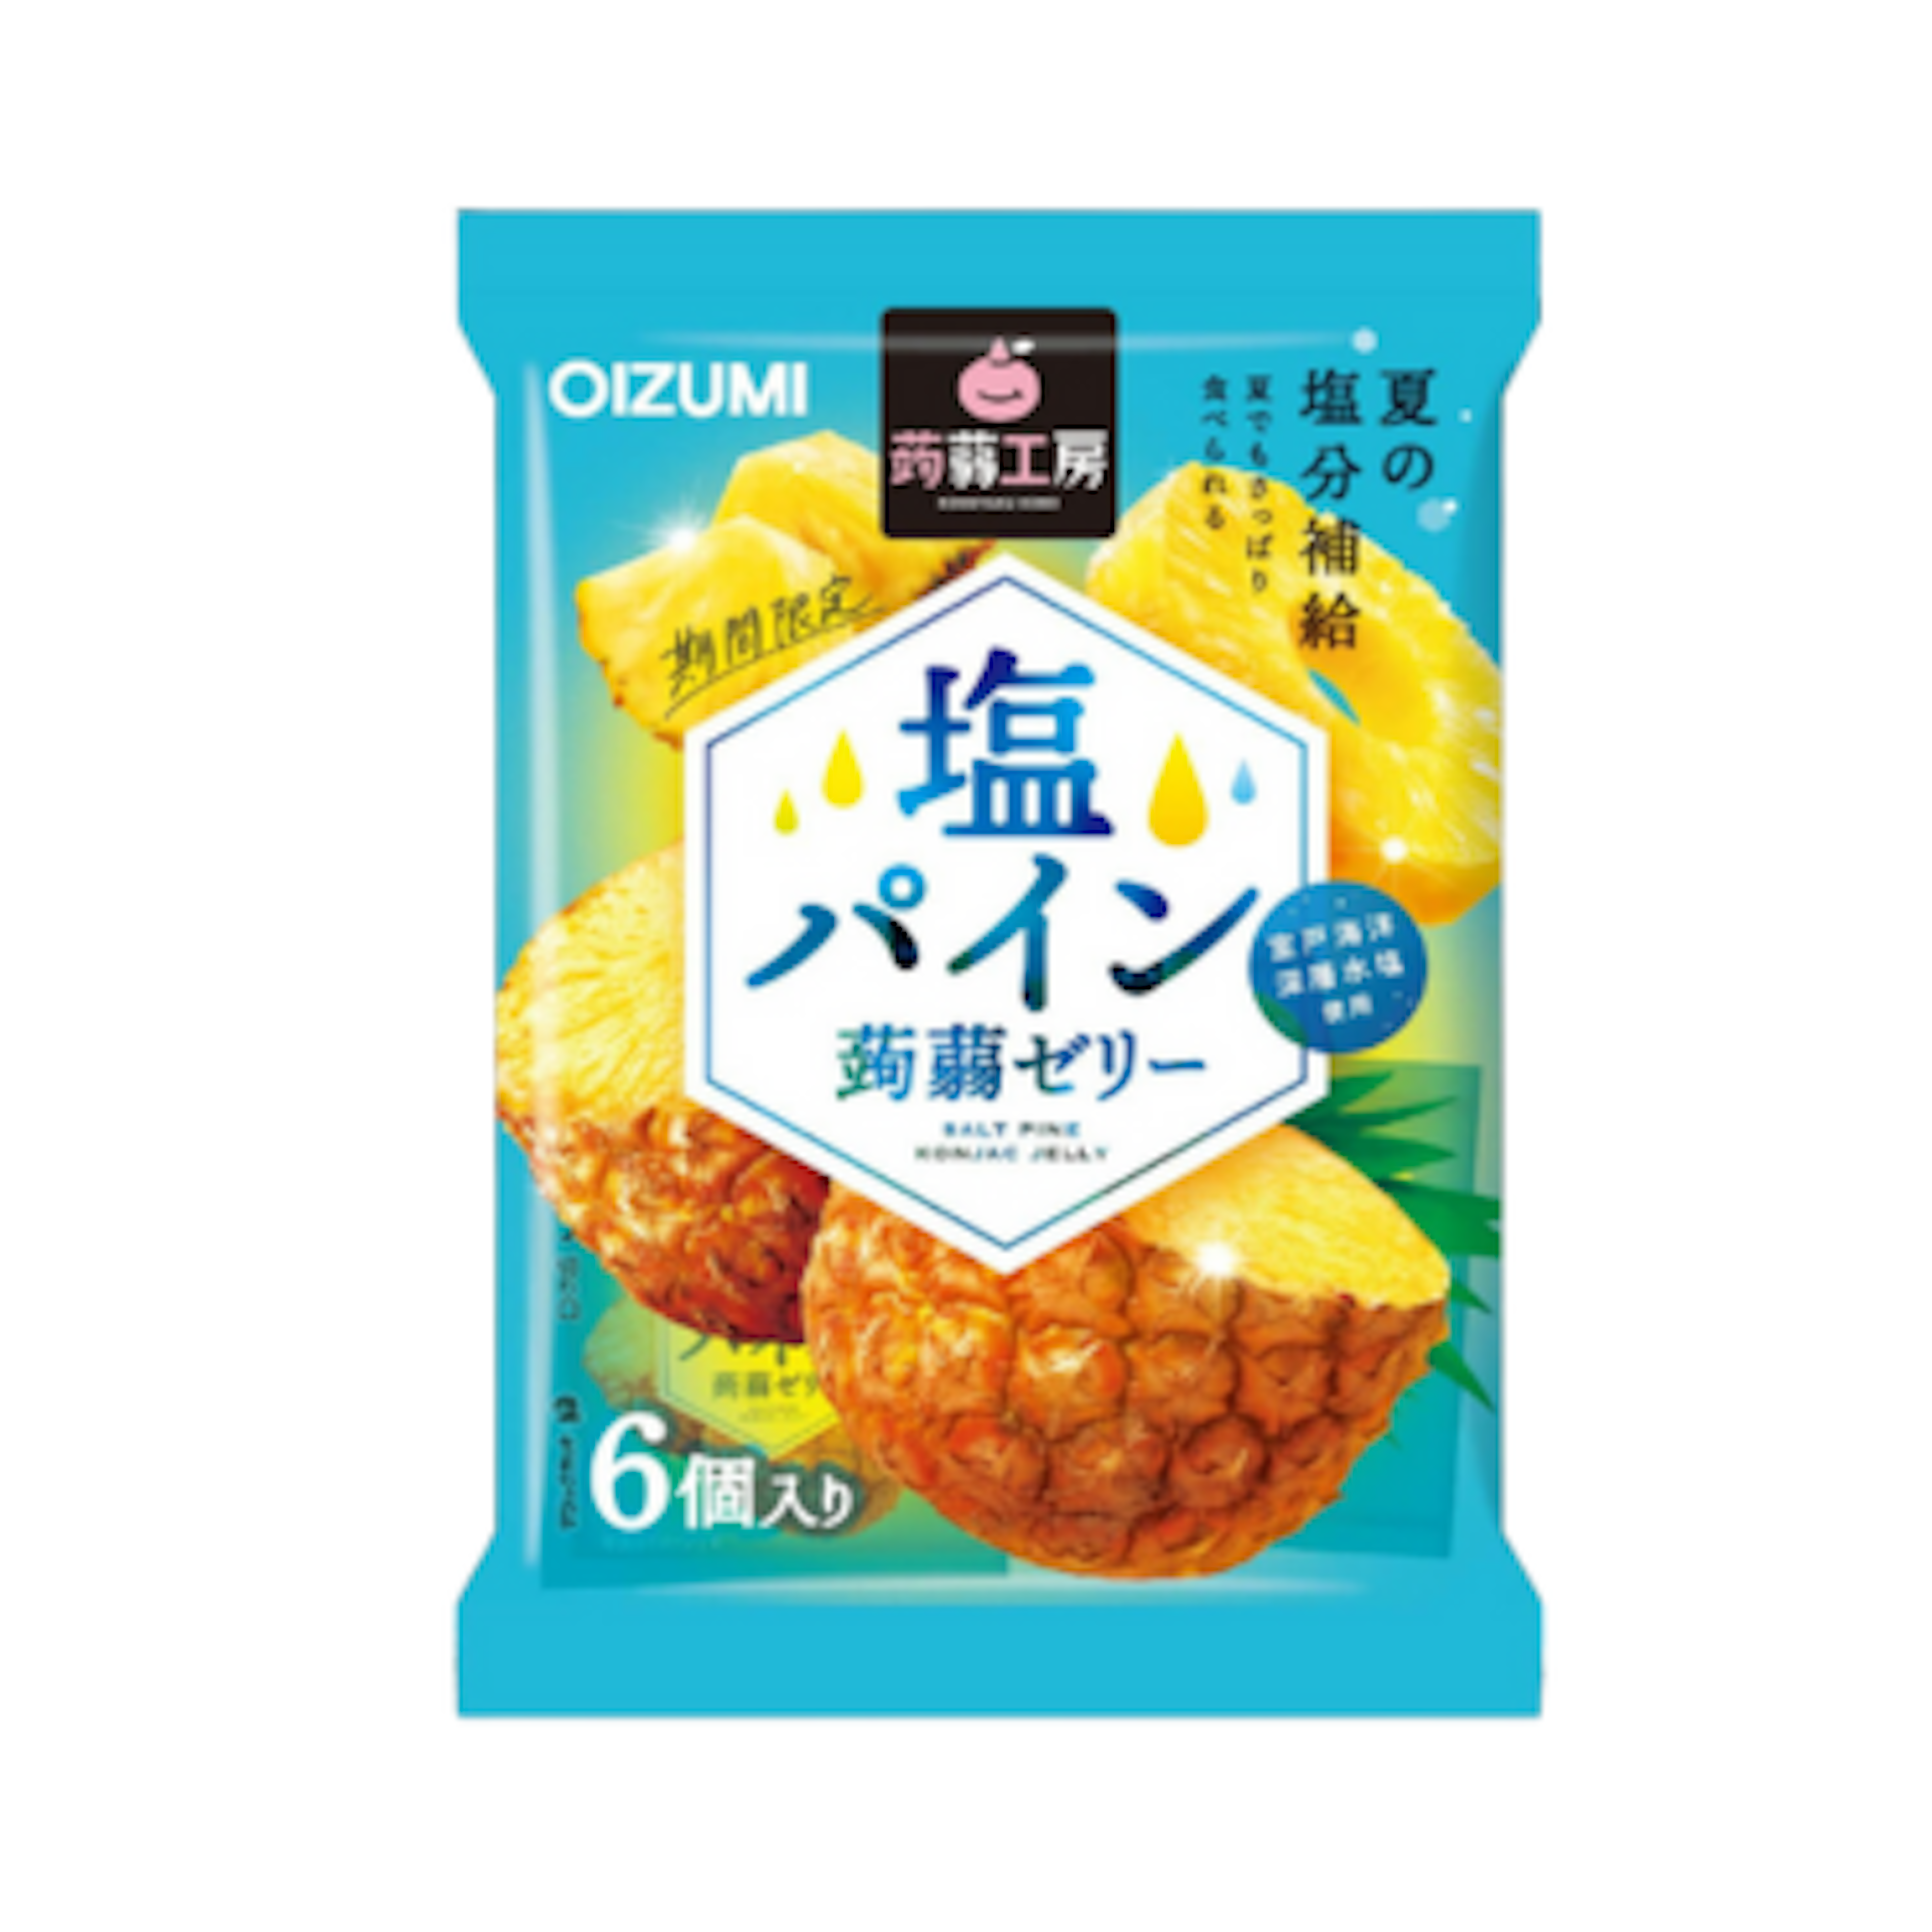 OIZUMI Konjac Jelly Salt Pineapple 106g - Low calorie and healthy snack